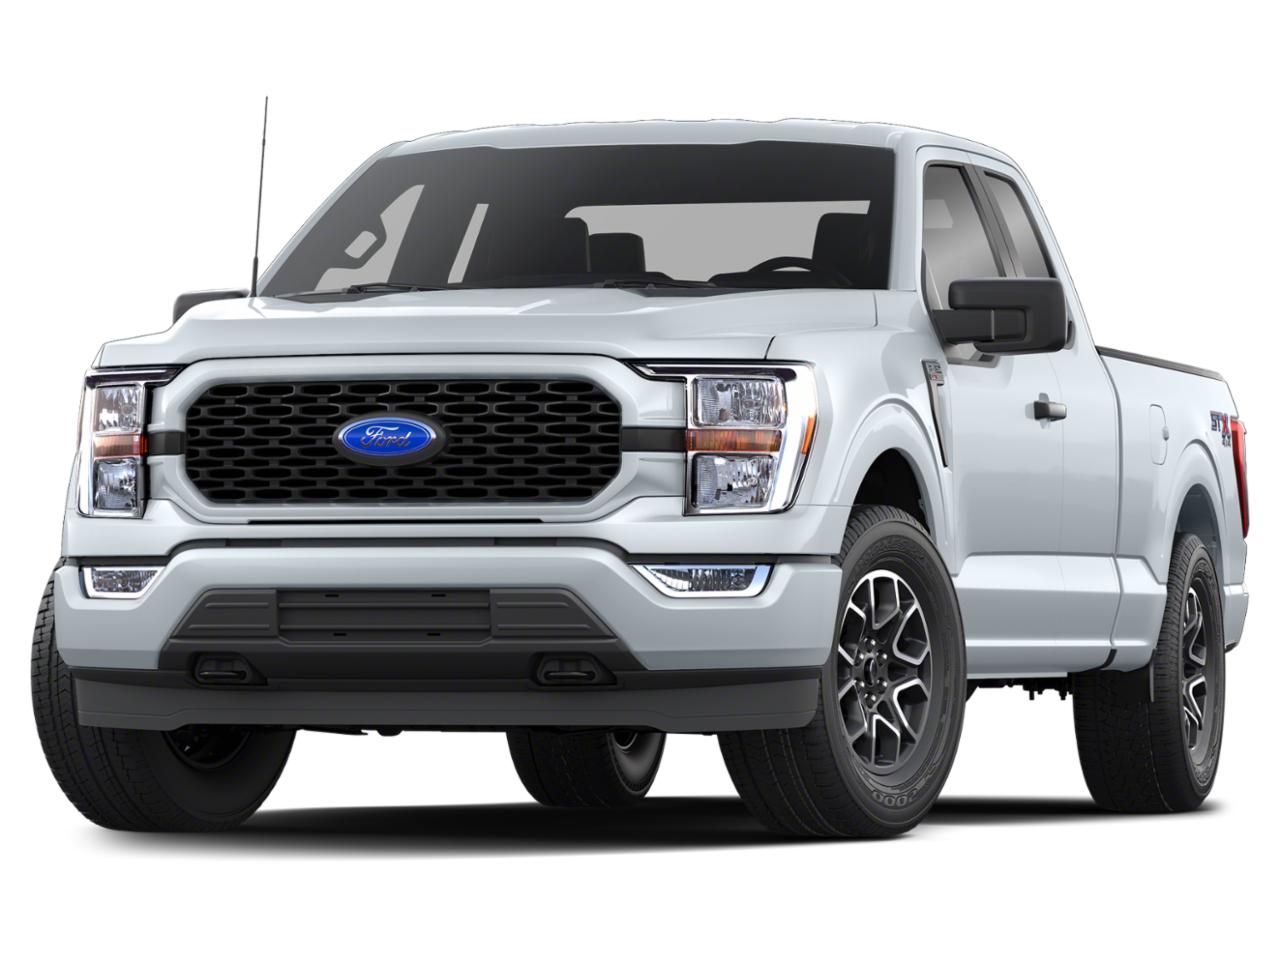 Space White Metallic 2021 Ford F150 for Sale at Ciocca